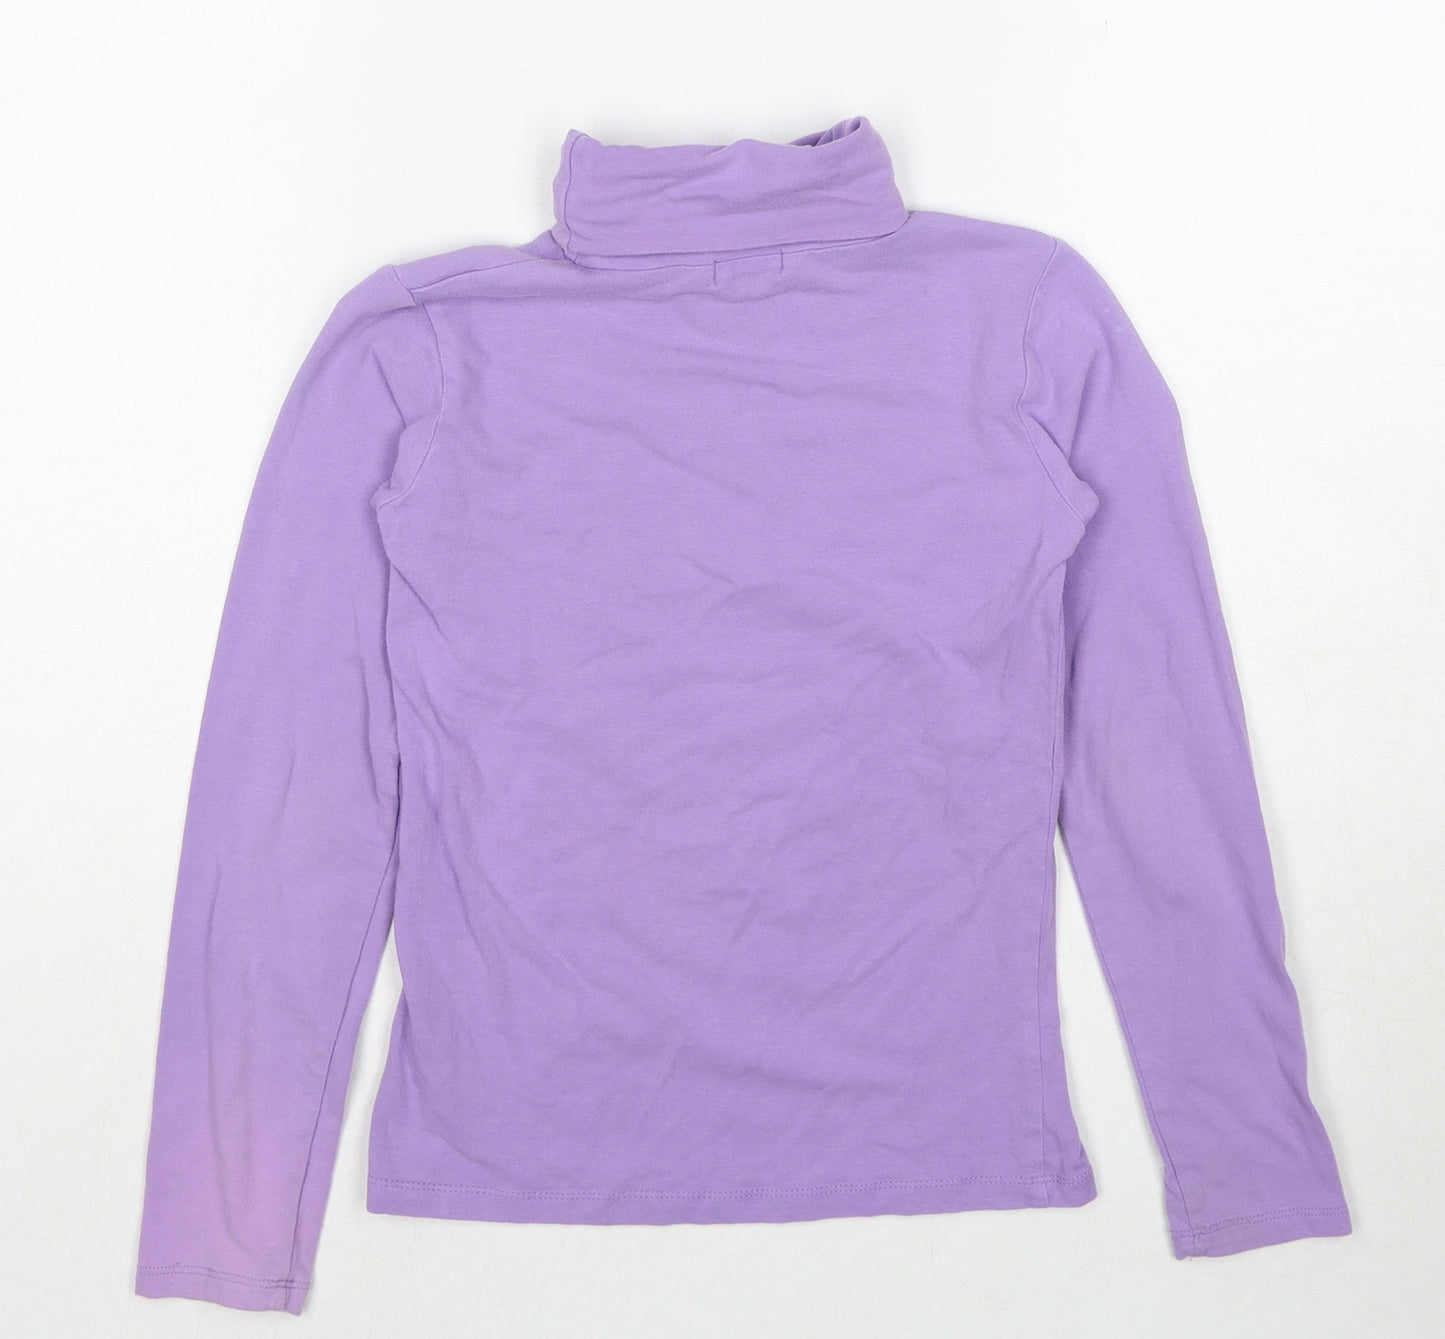 Teen Club Girls Purple Cotton Basic T-Shirt Size 9-10 Years Roll Neck Pullover - Age 9-11 Years